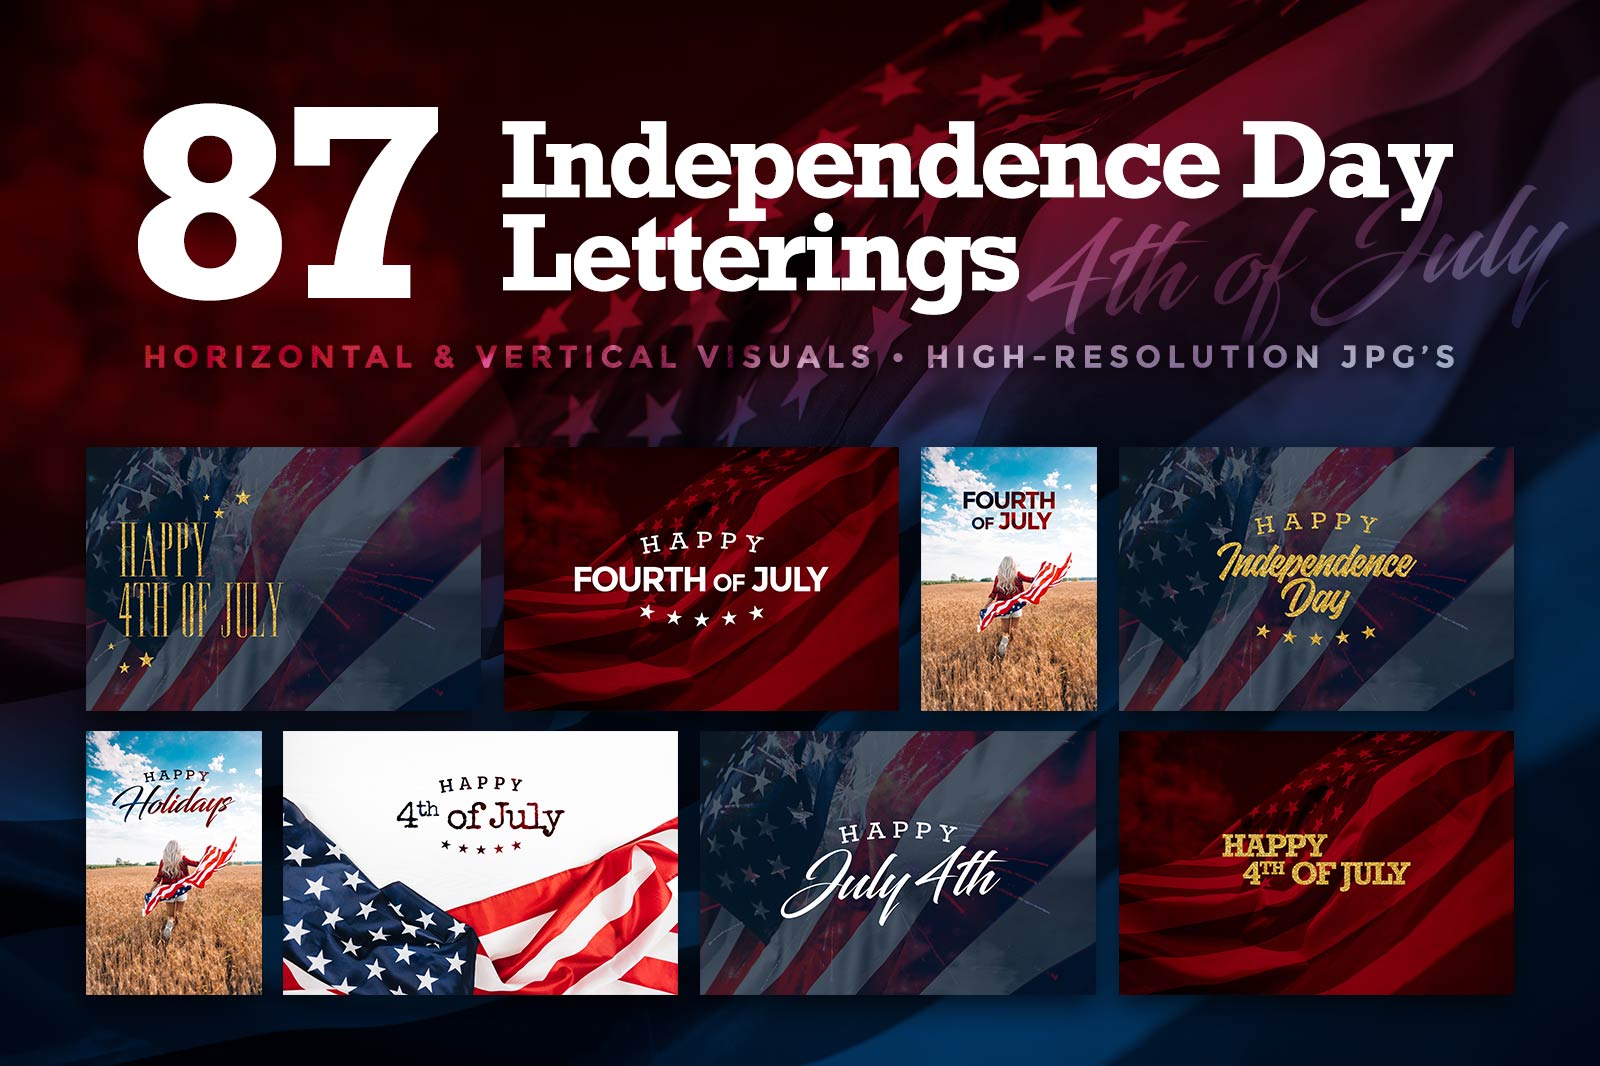 Download hi-res stock photos from our Independence Day Letterings PREMIUM Collection!